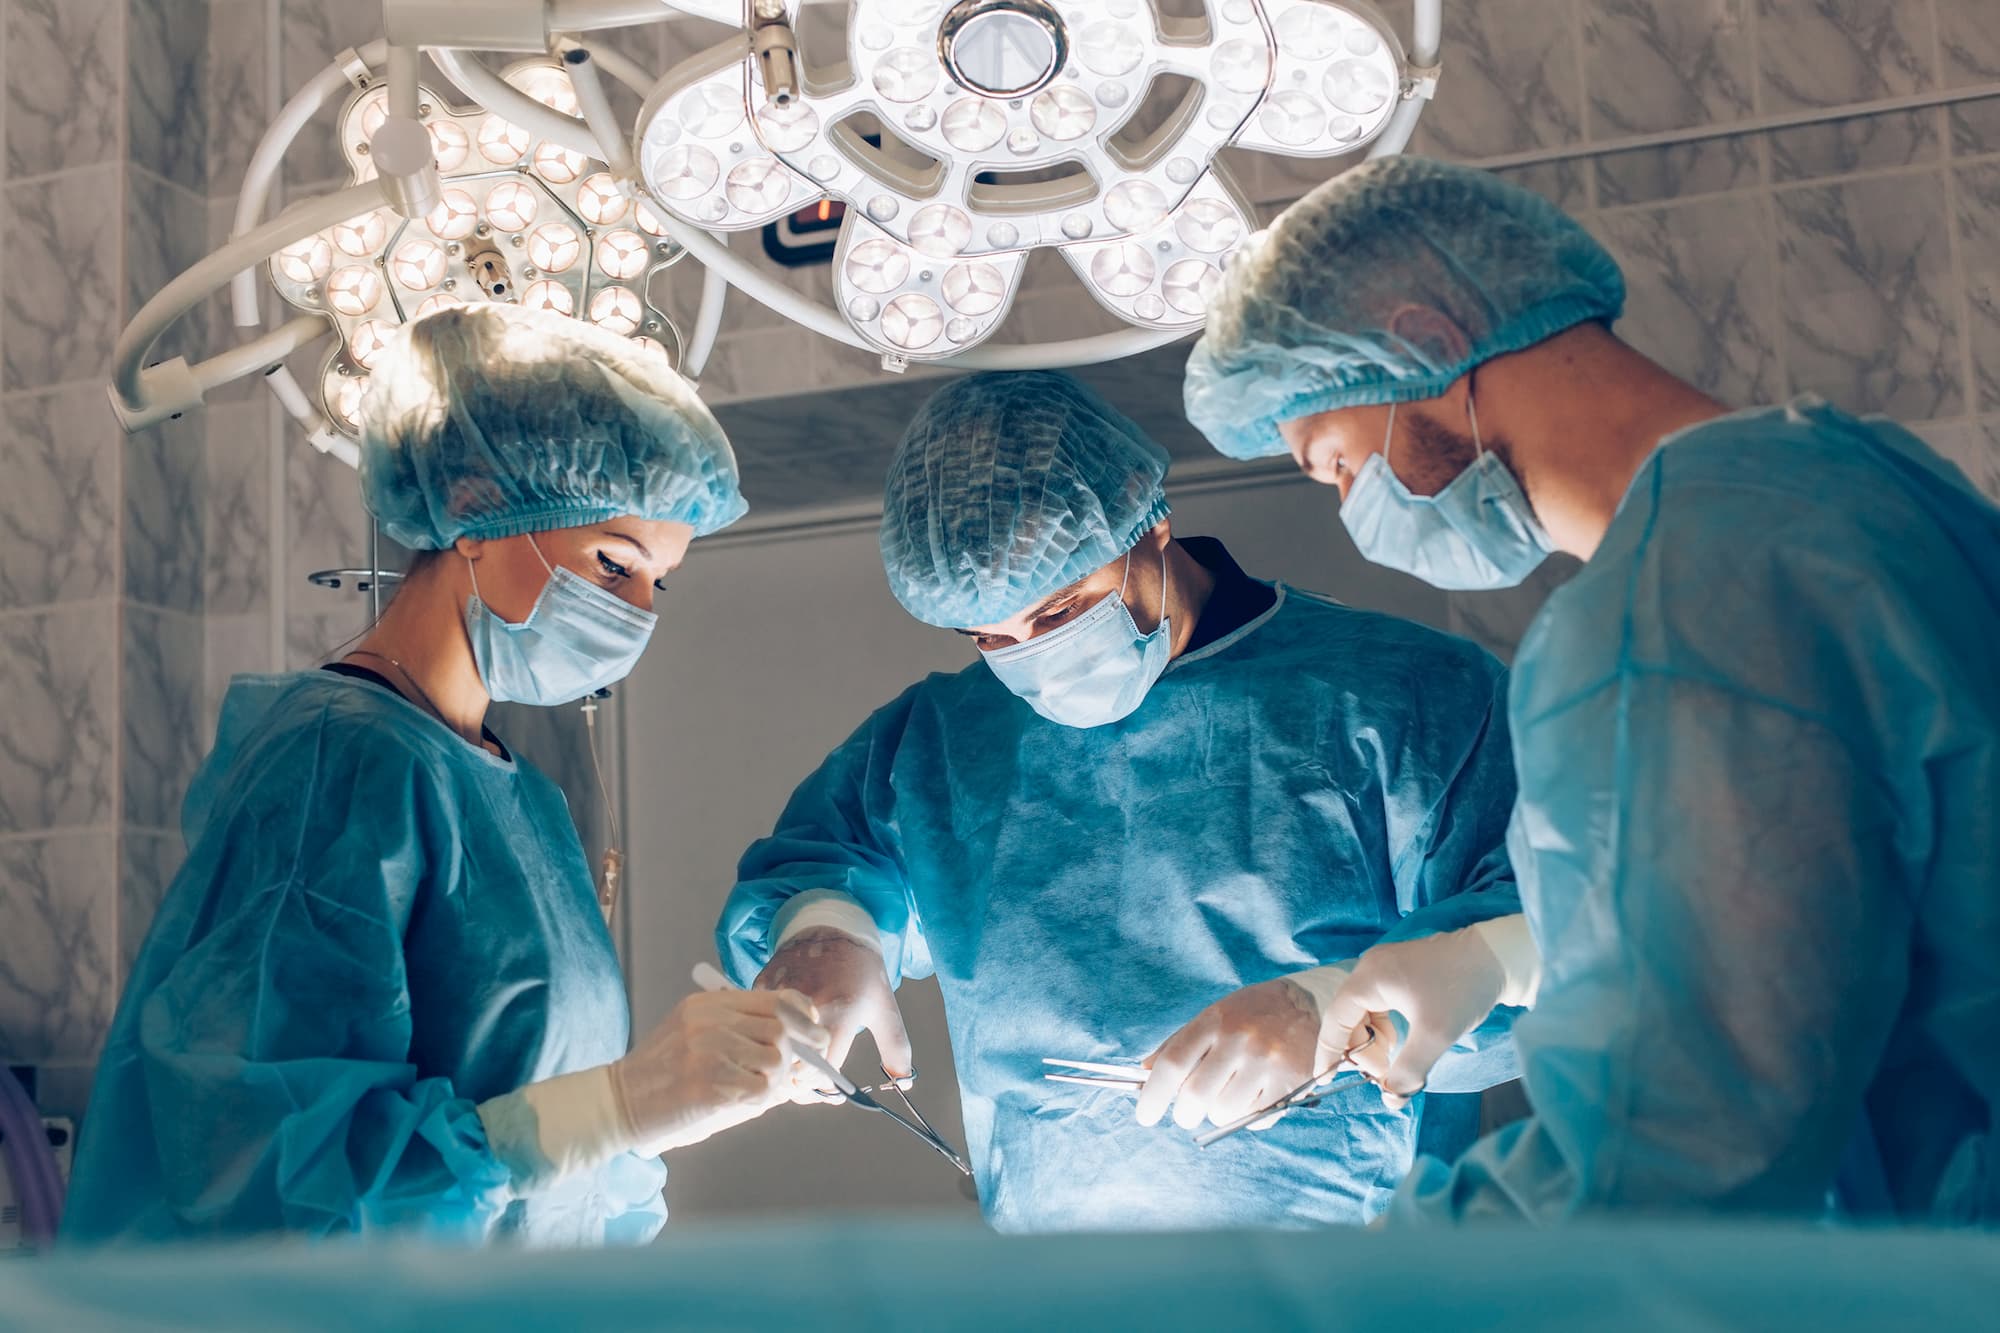 3 surgeons operating on a patient